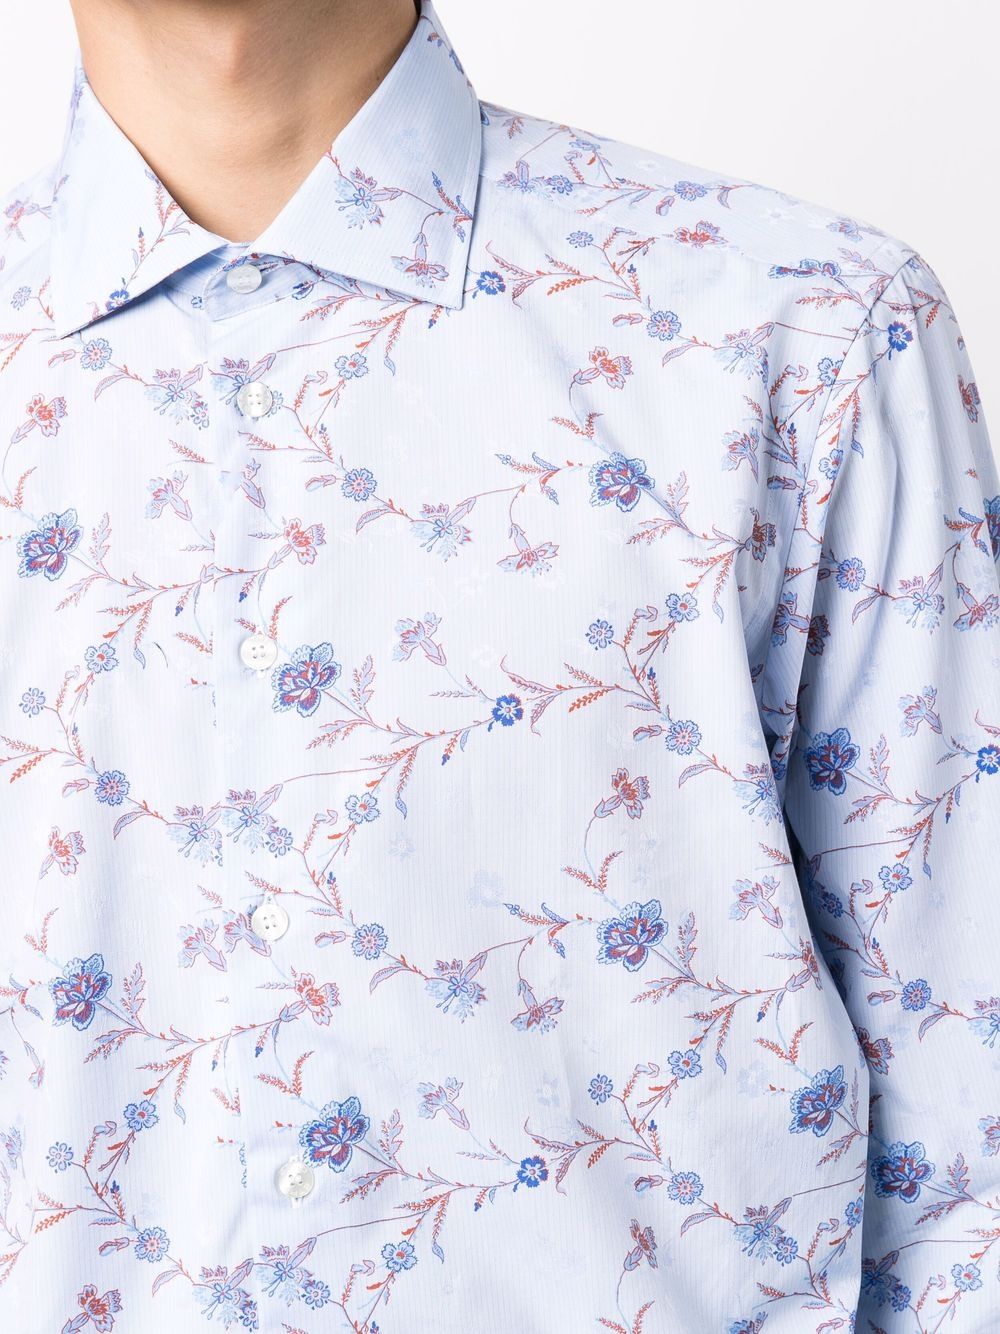 Shop ETRO all-over floral print shirt with Express Delivery - FARFETCH